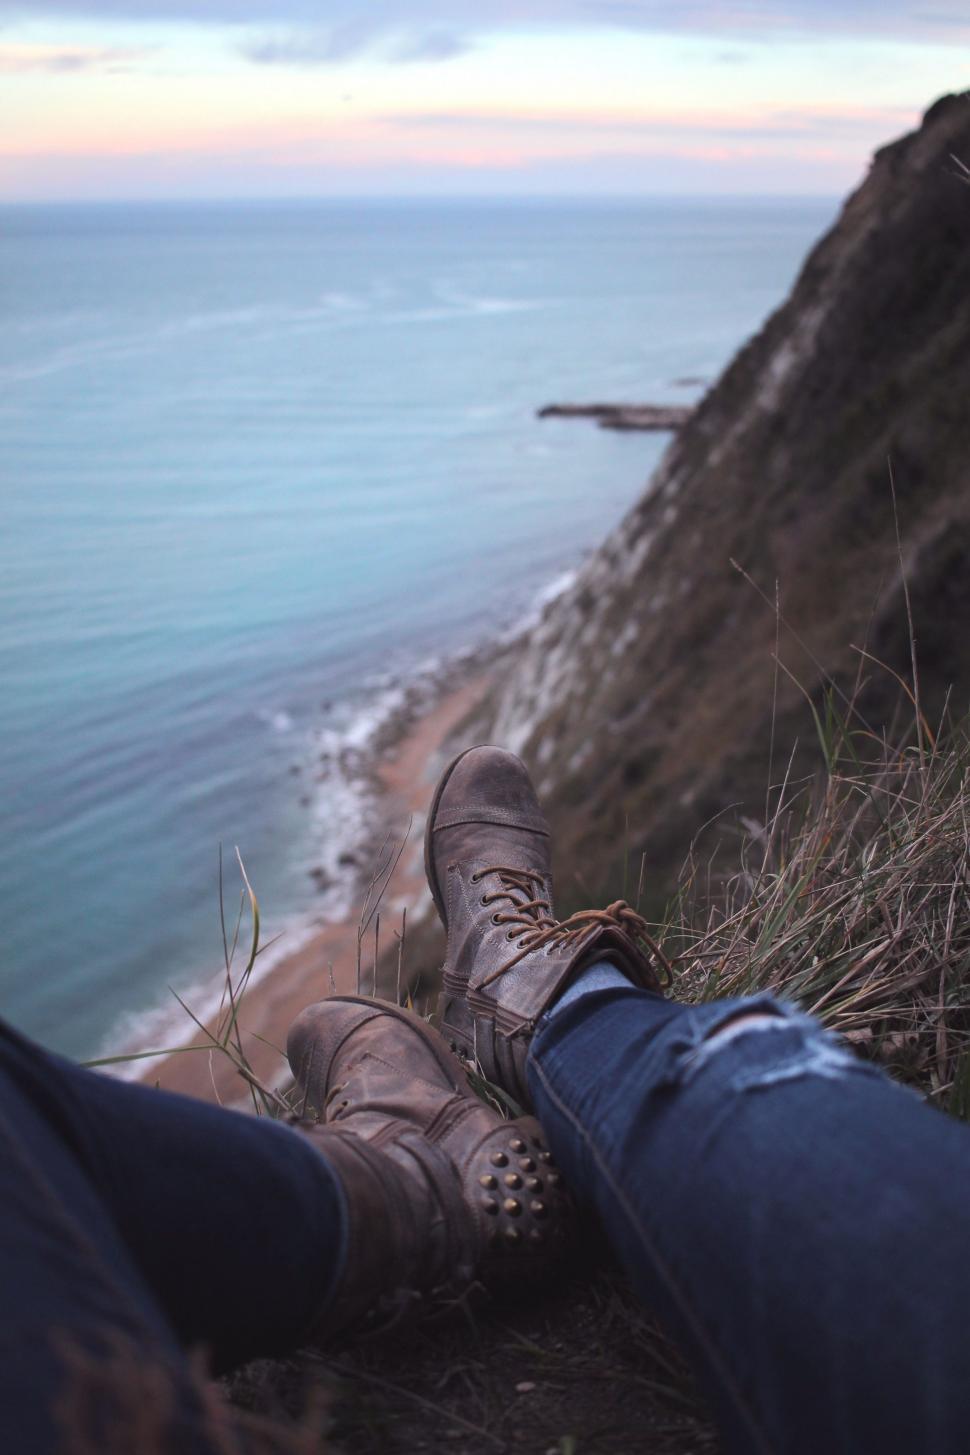 Free Image of Feet Resting on Cliff Overlooking Ocean 